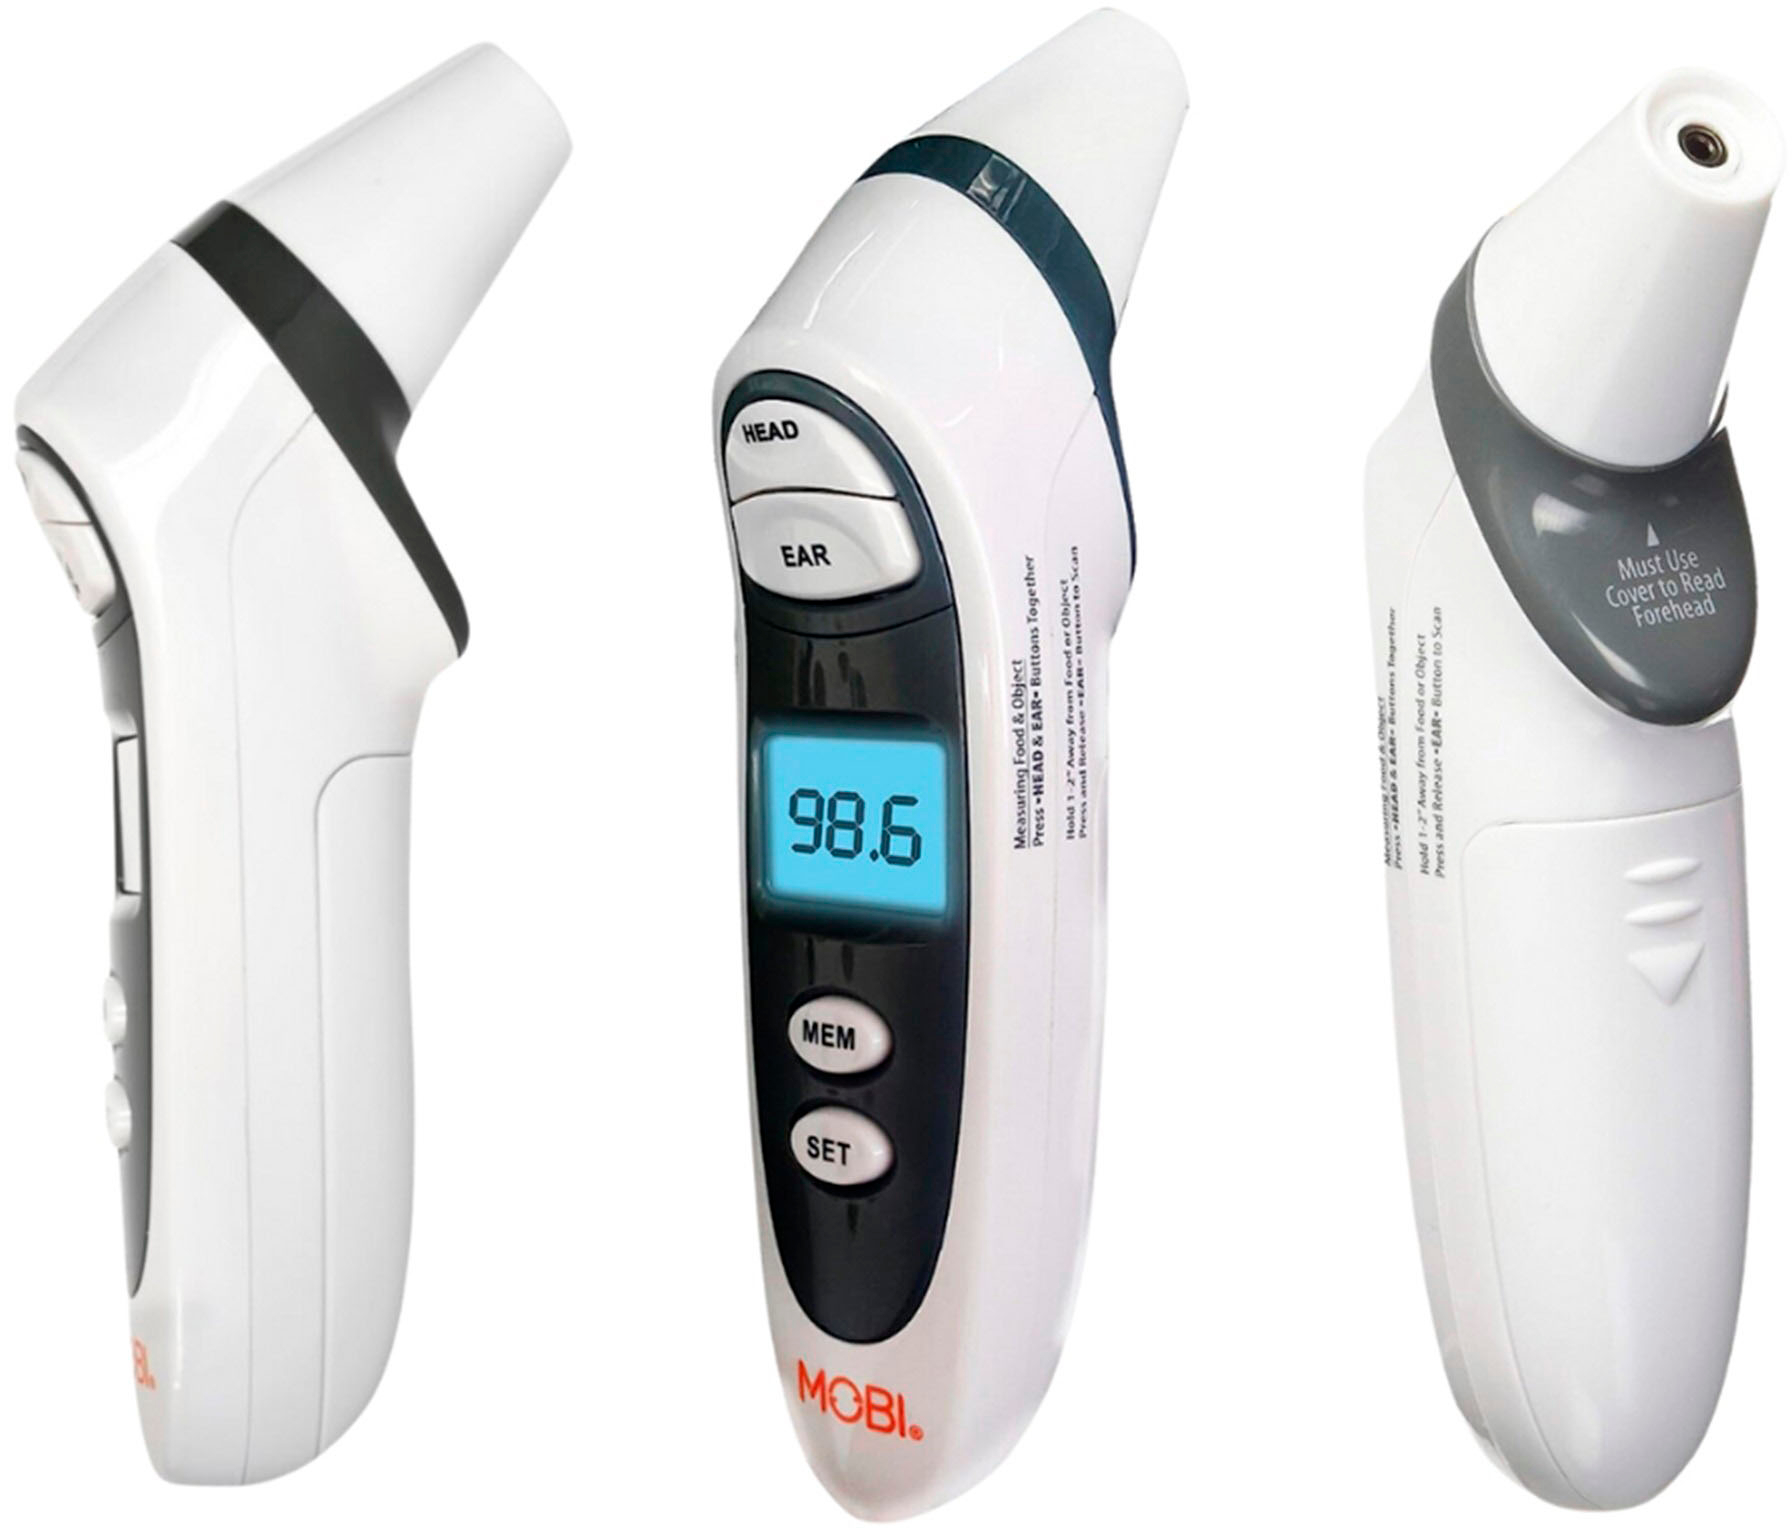 MOBI Home Clinic - DualScan Thermometer, Blood Pressure